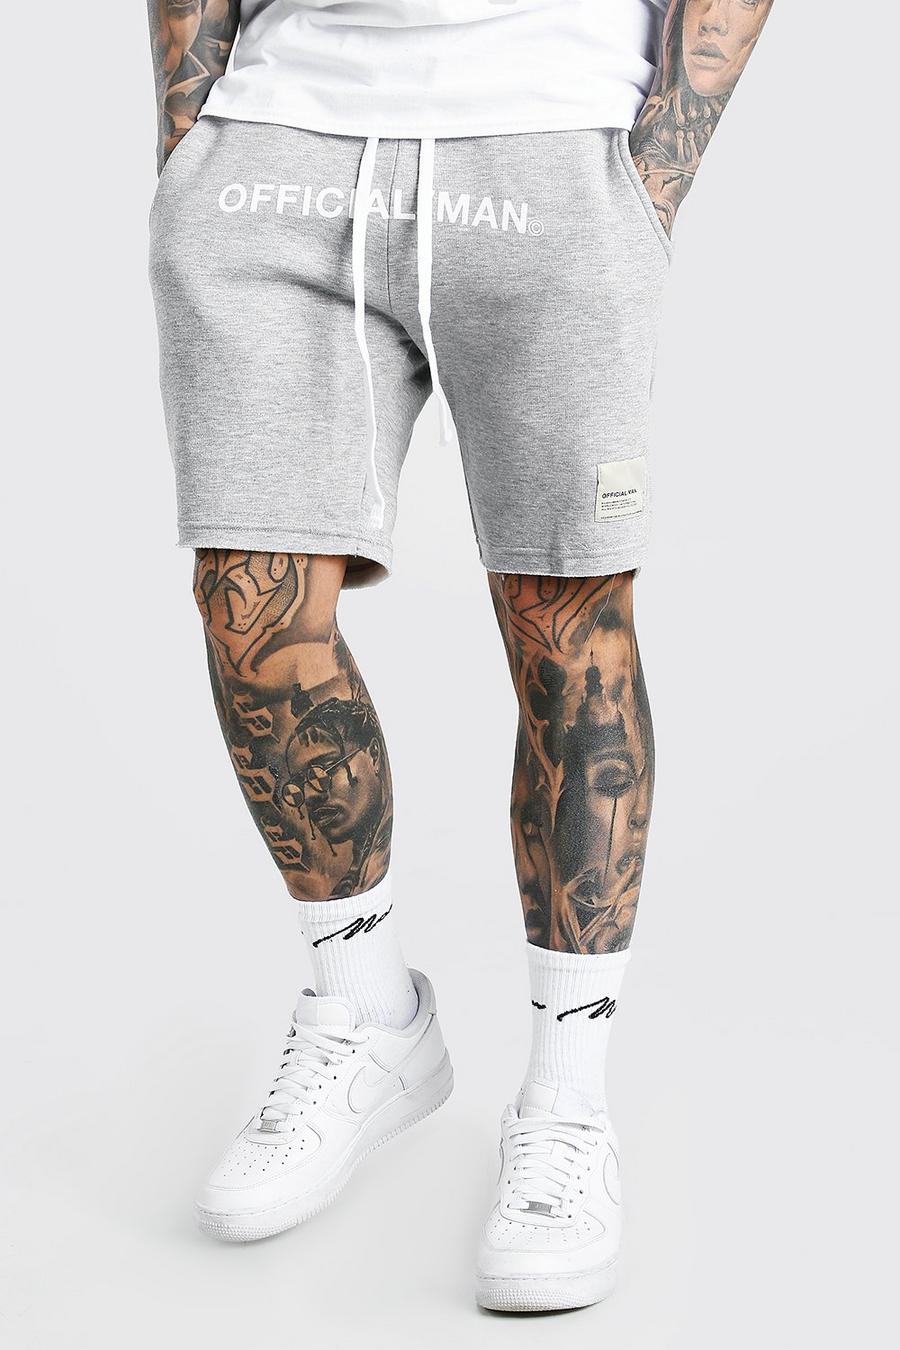 Grey marl Mid Length Official Man Print Jersey Short image number 1